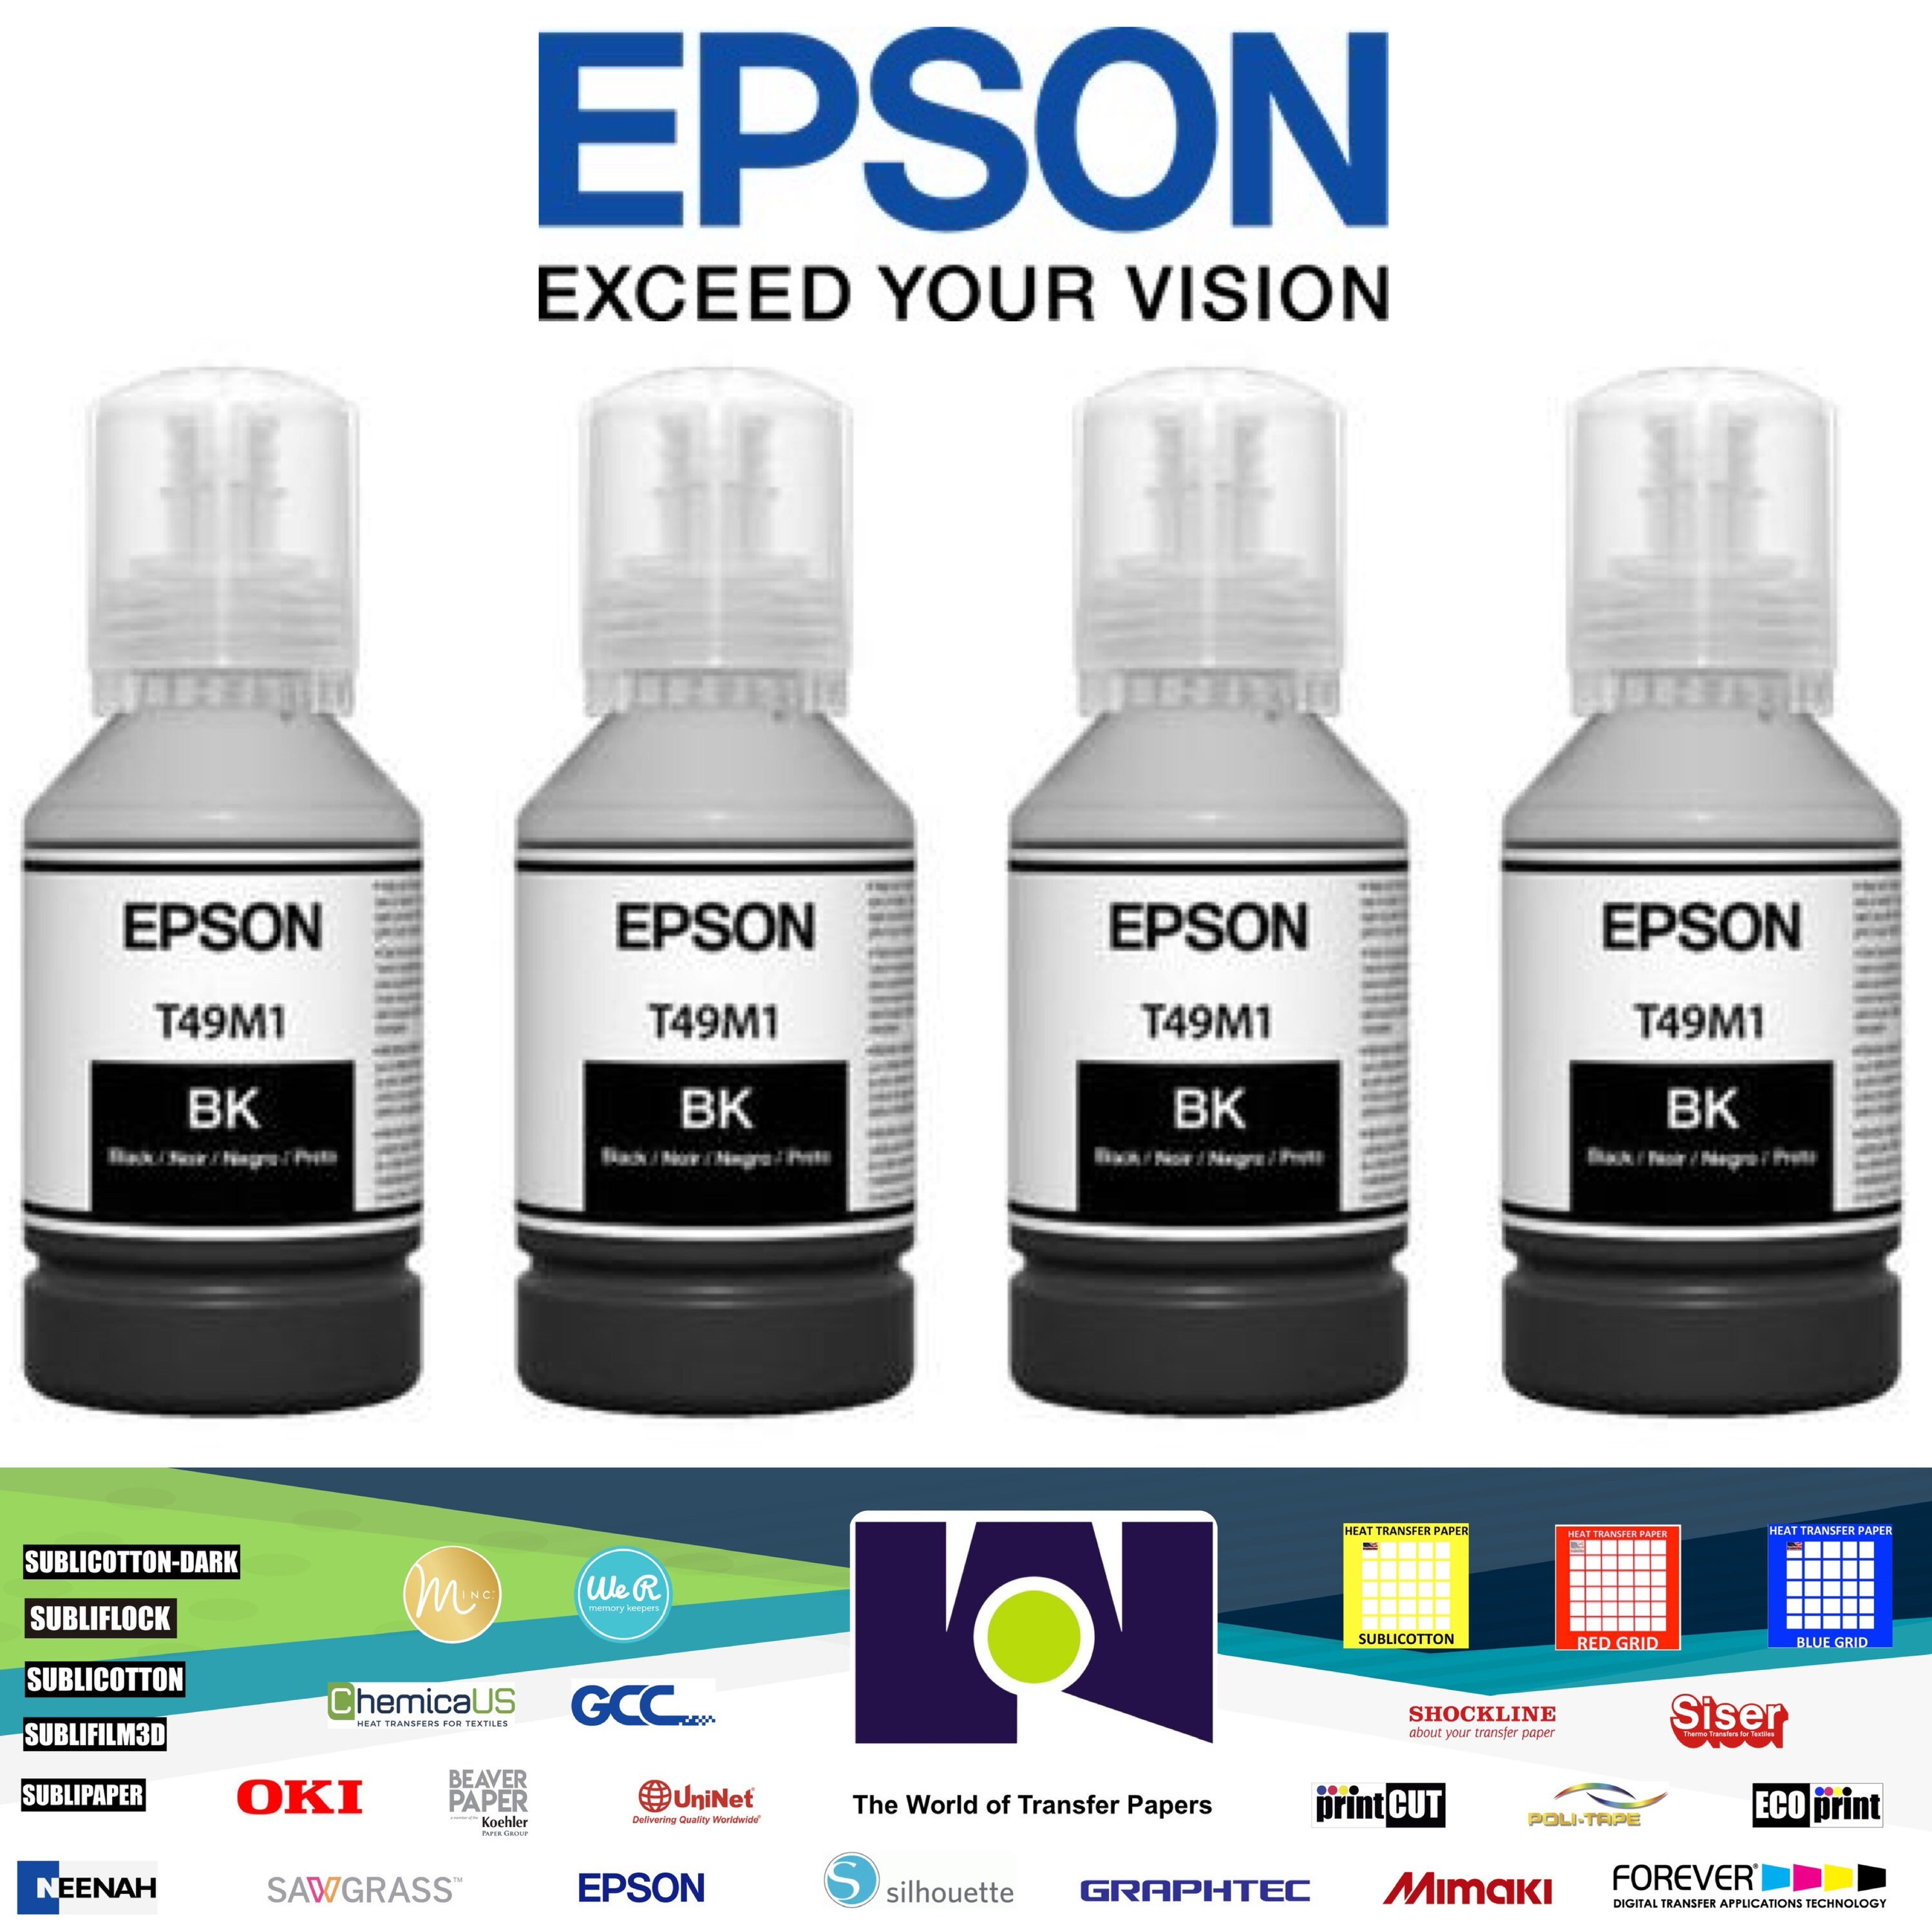 Color Make Yellow sublimation ink for Epson F170 and Epson F570